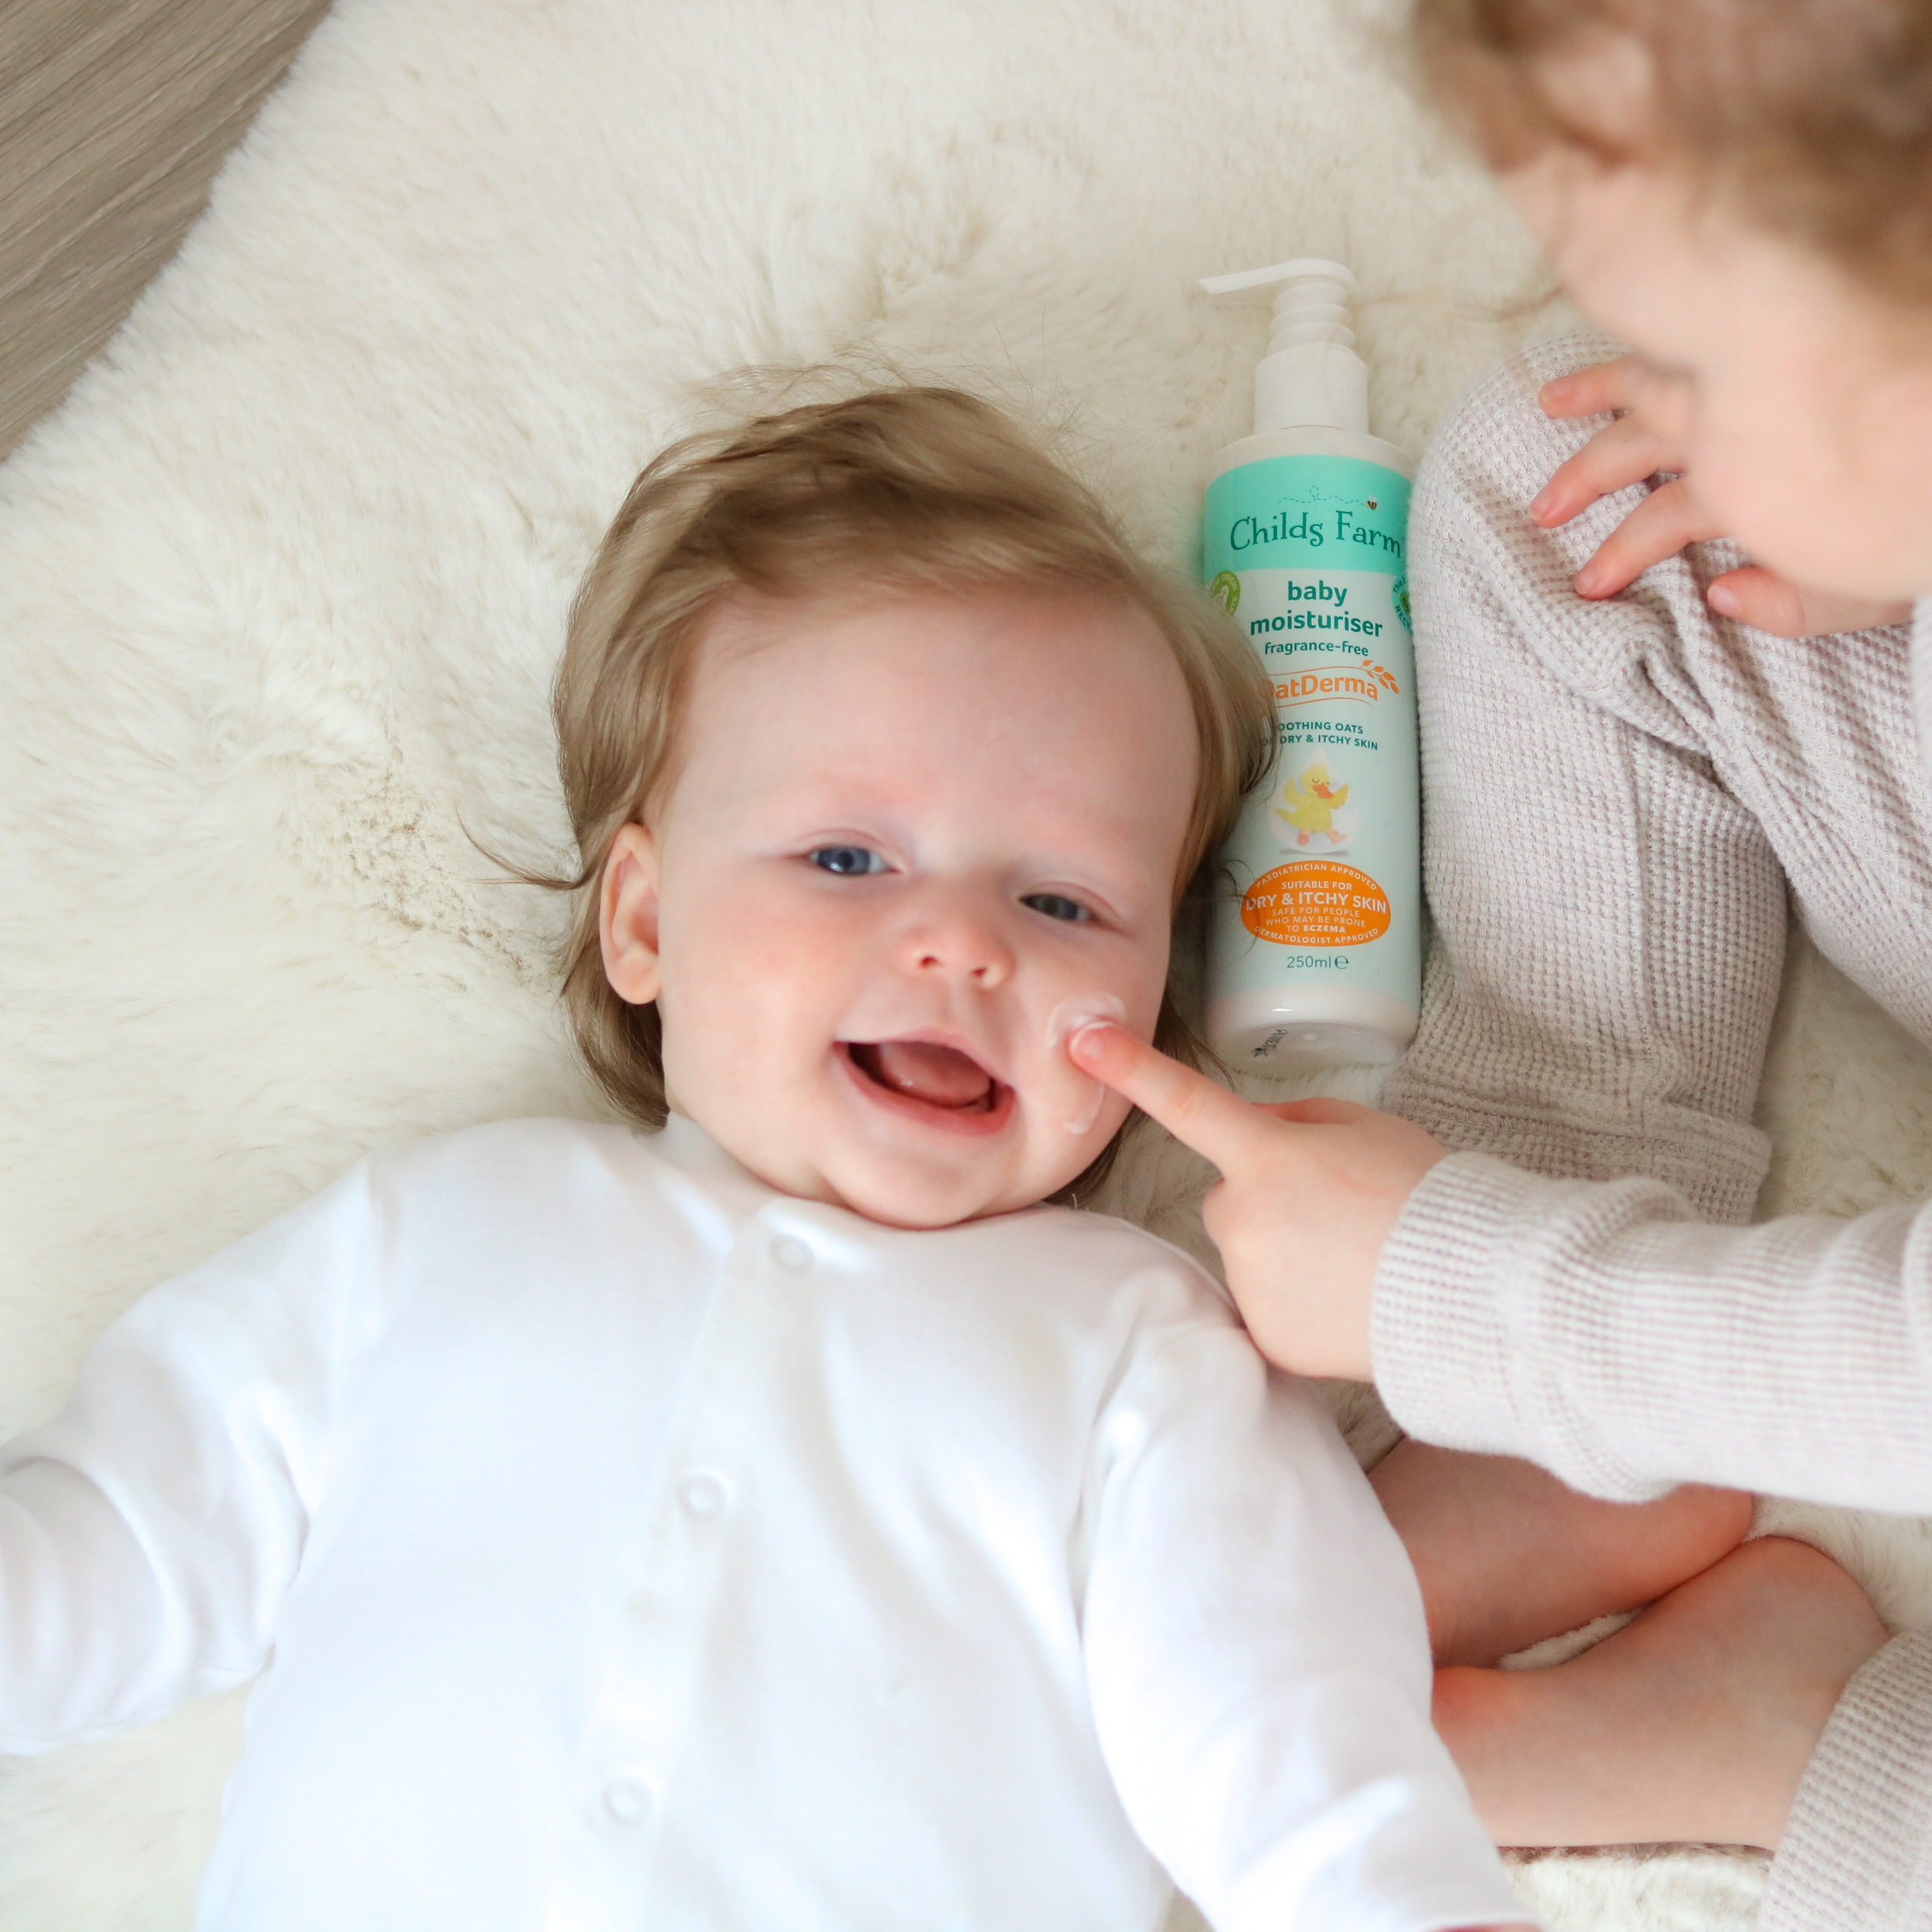 Childs Farm Becomes First B Corp in UK Baby and Personal Care